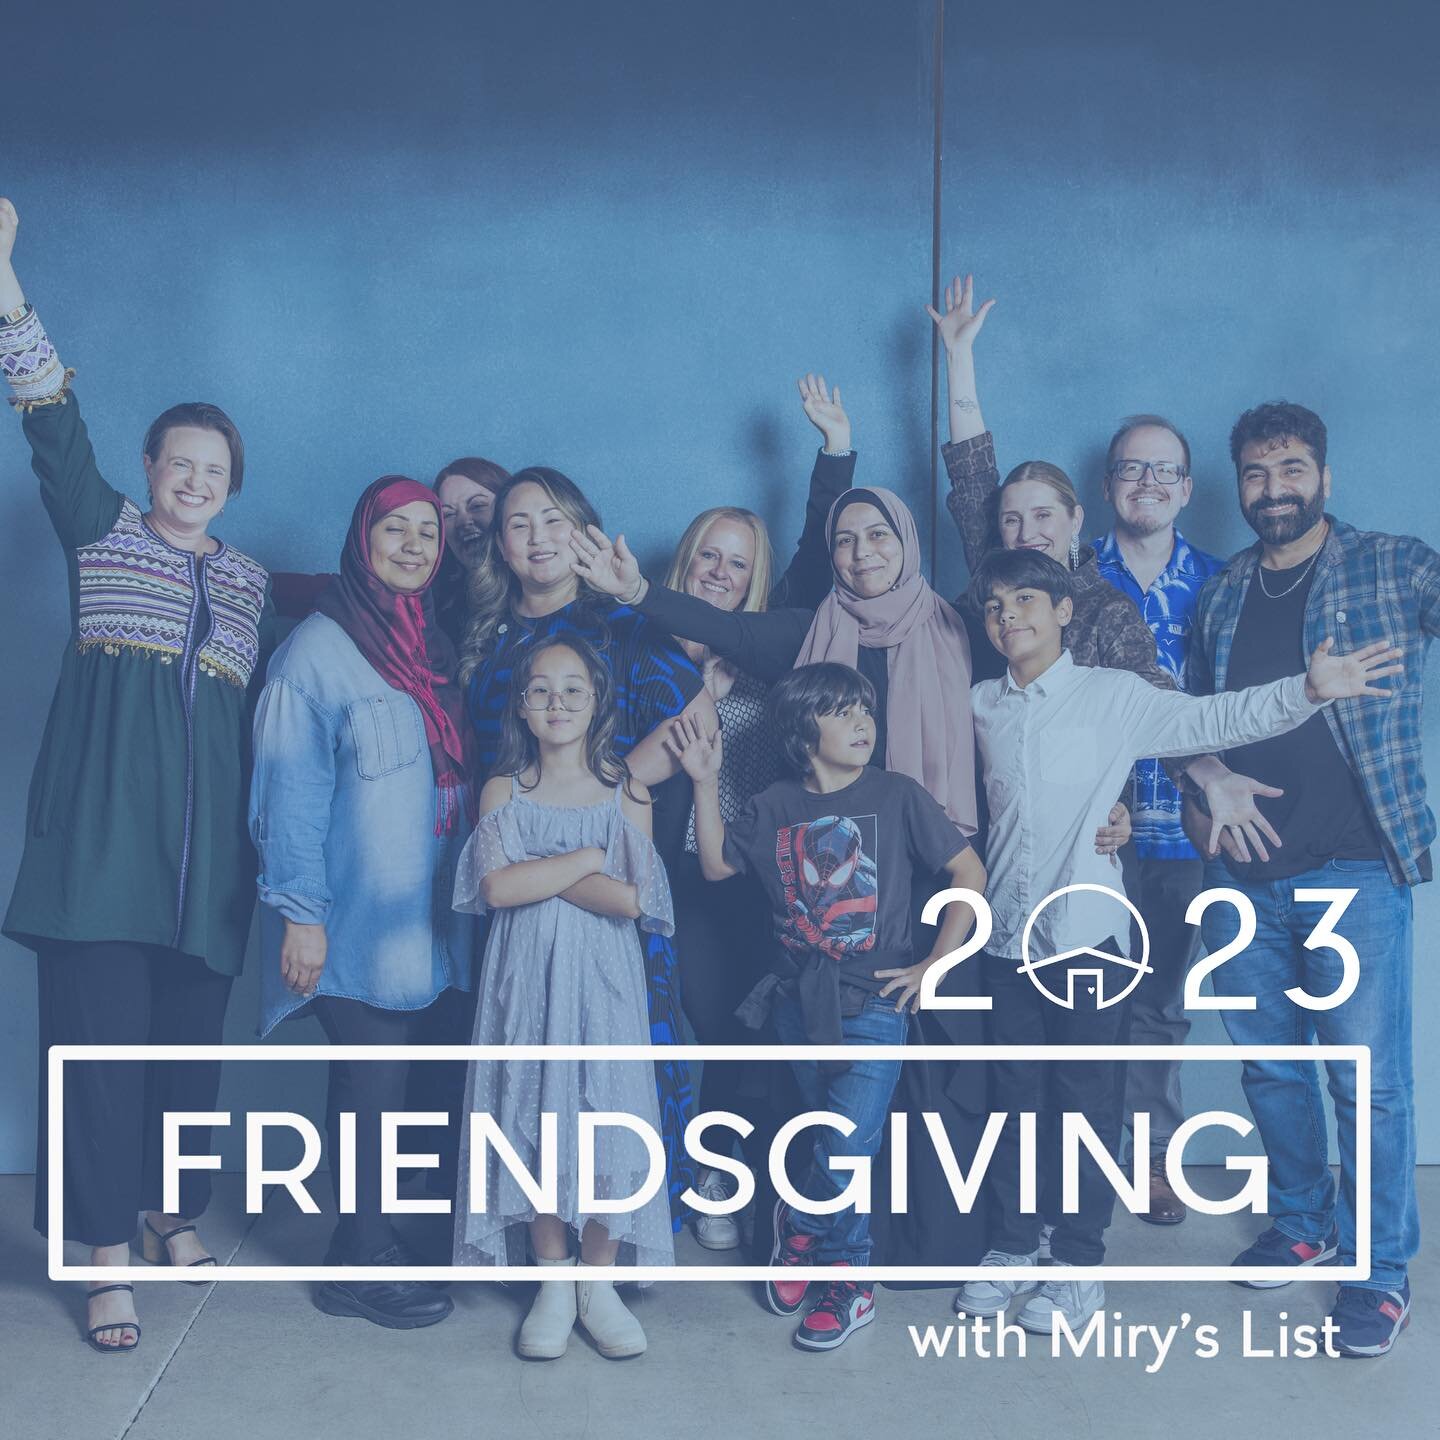 We are pleased to announce the launch of 2023 Friendsgiving with @miryslist . Our goal is to raise $200,000 to support 250 more new arrival families in 2024. Jump in at give.miryslist.org LINK IN BIO! 

Our world can leave us feeling alone - complete